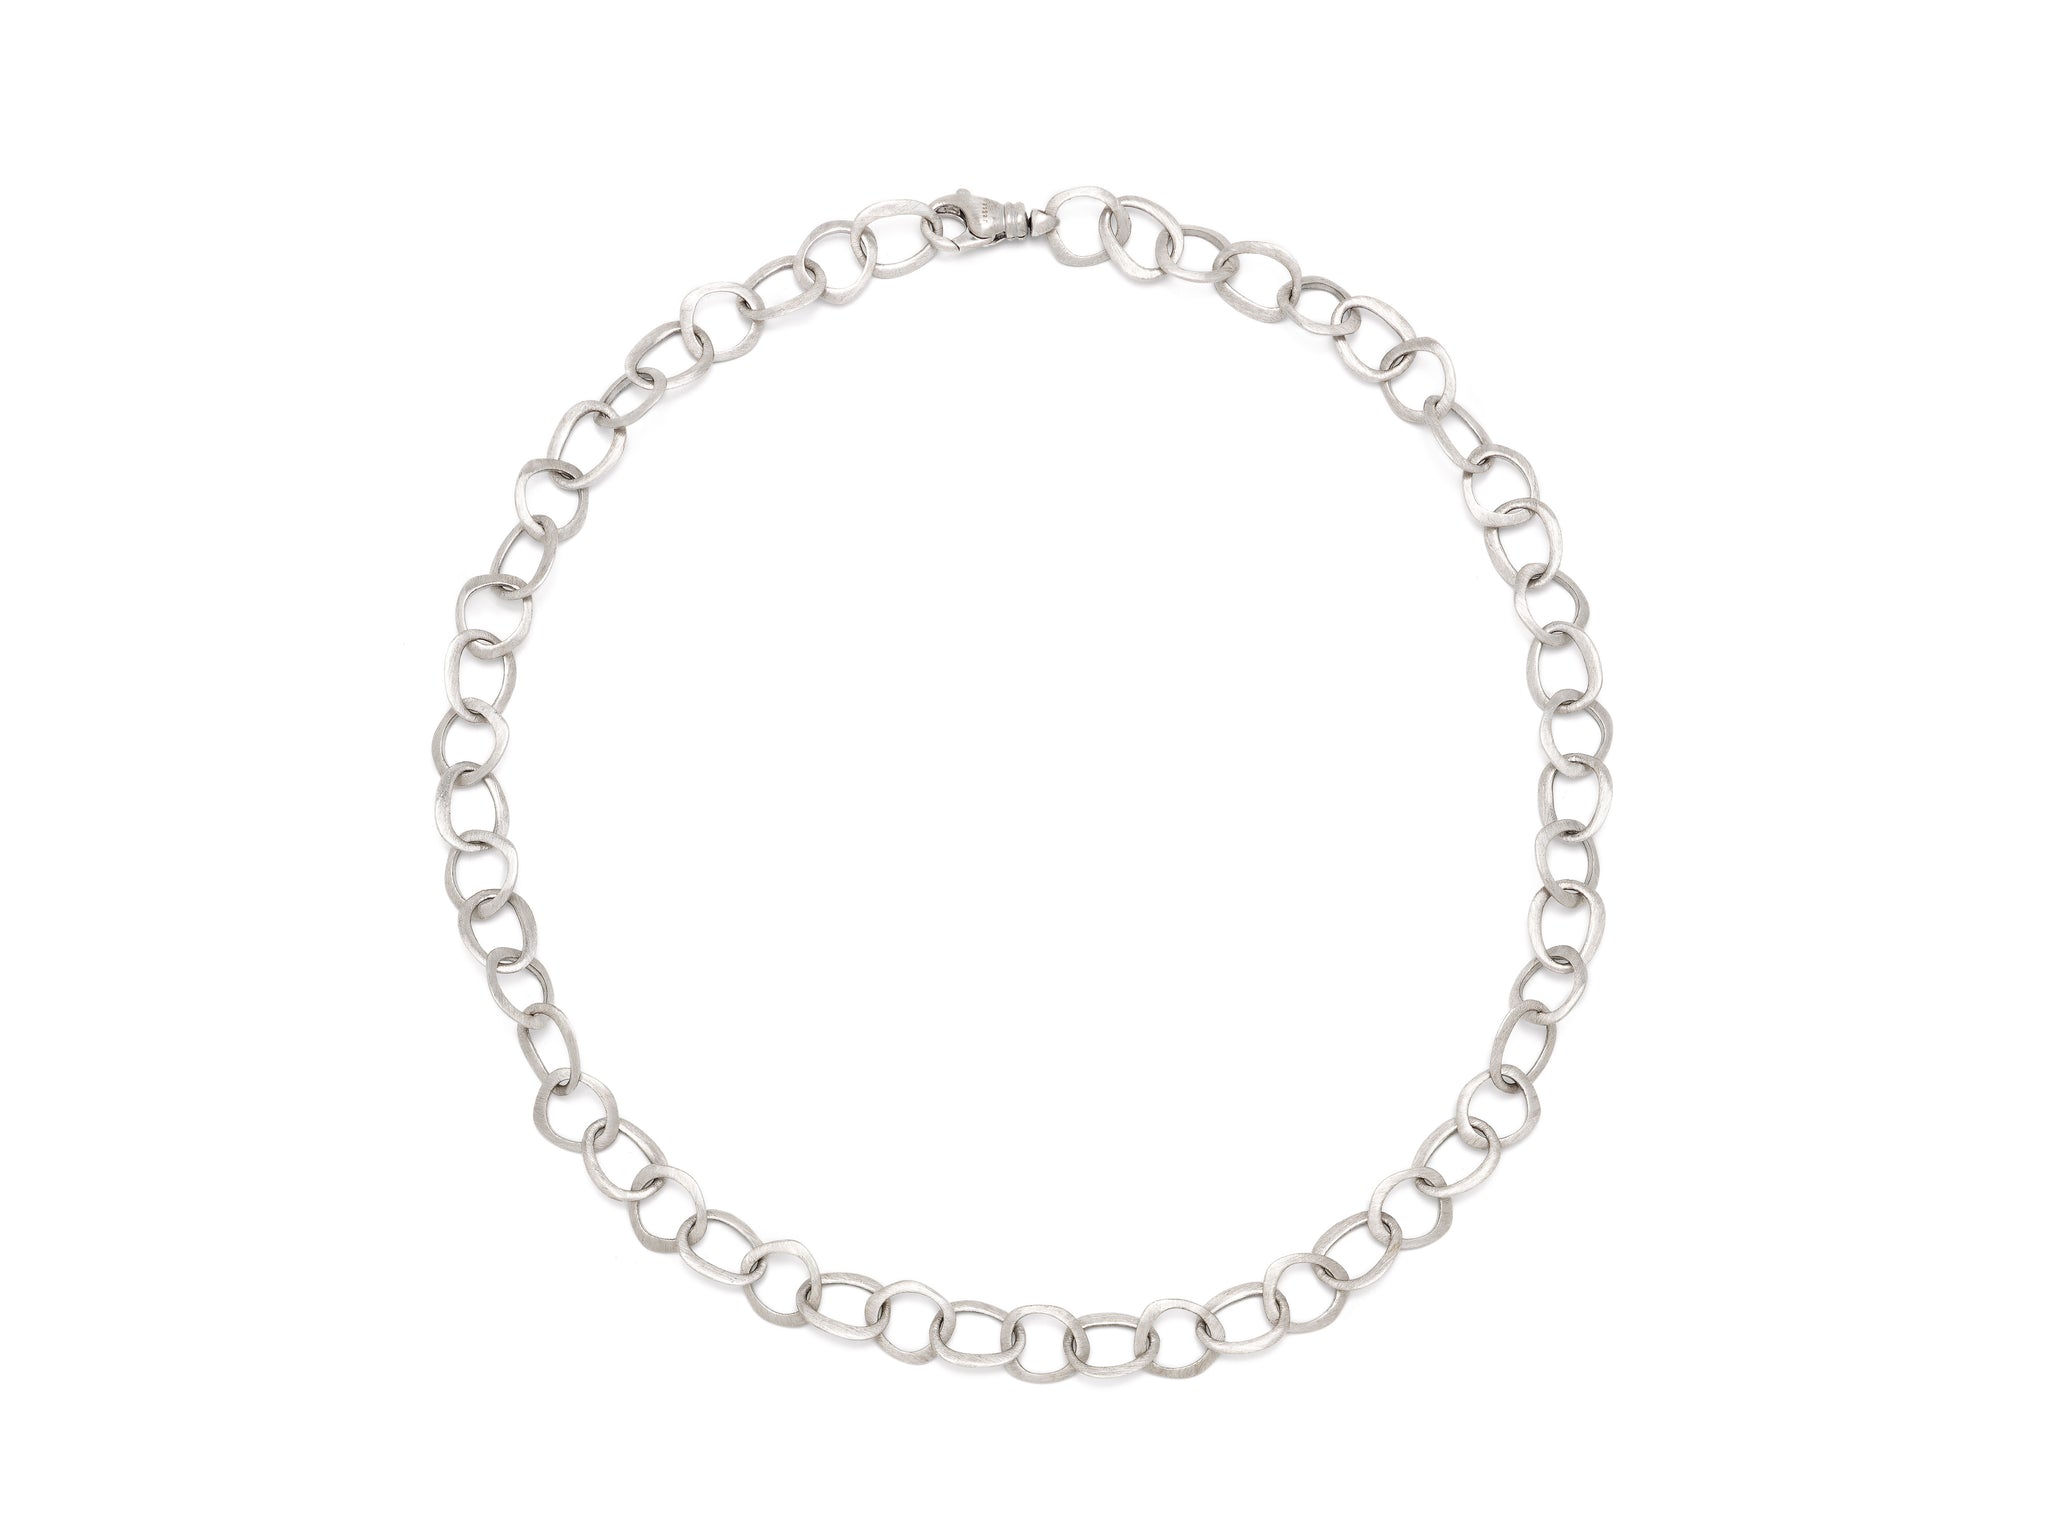 18 krt white gold necklace with wrought links